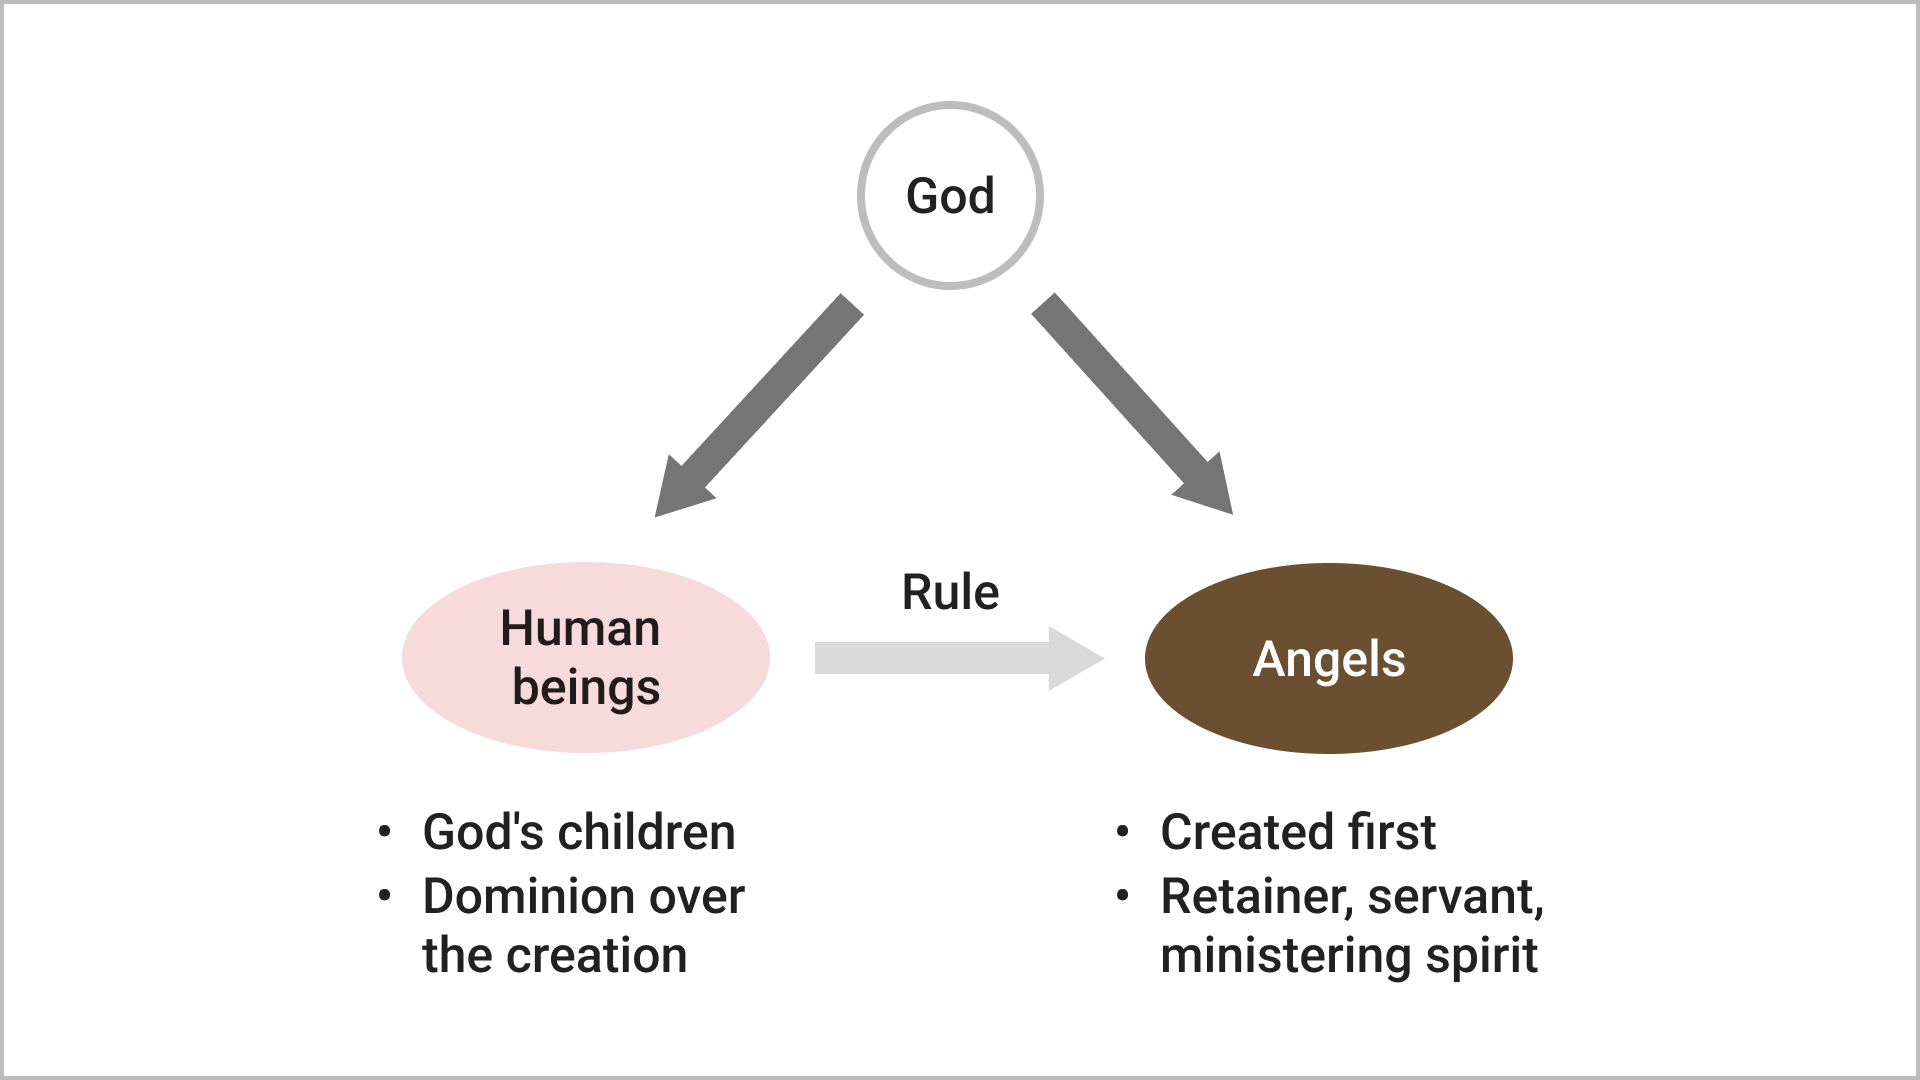 Angels, Their Missions and Their Relationship to Human Beings